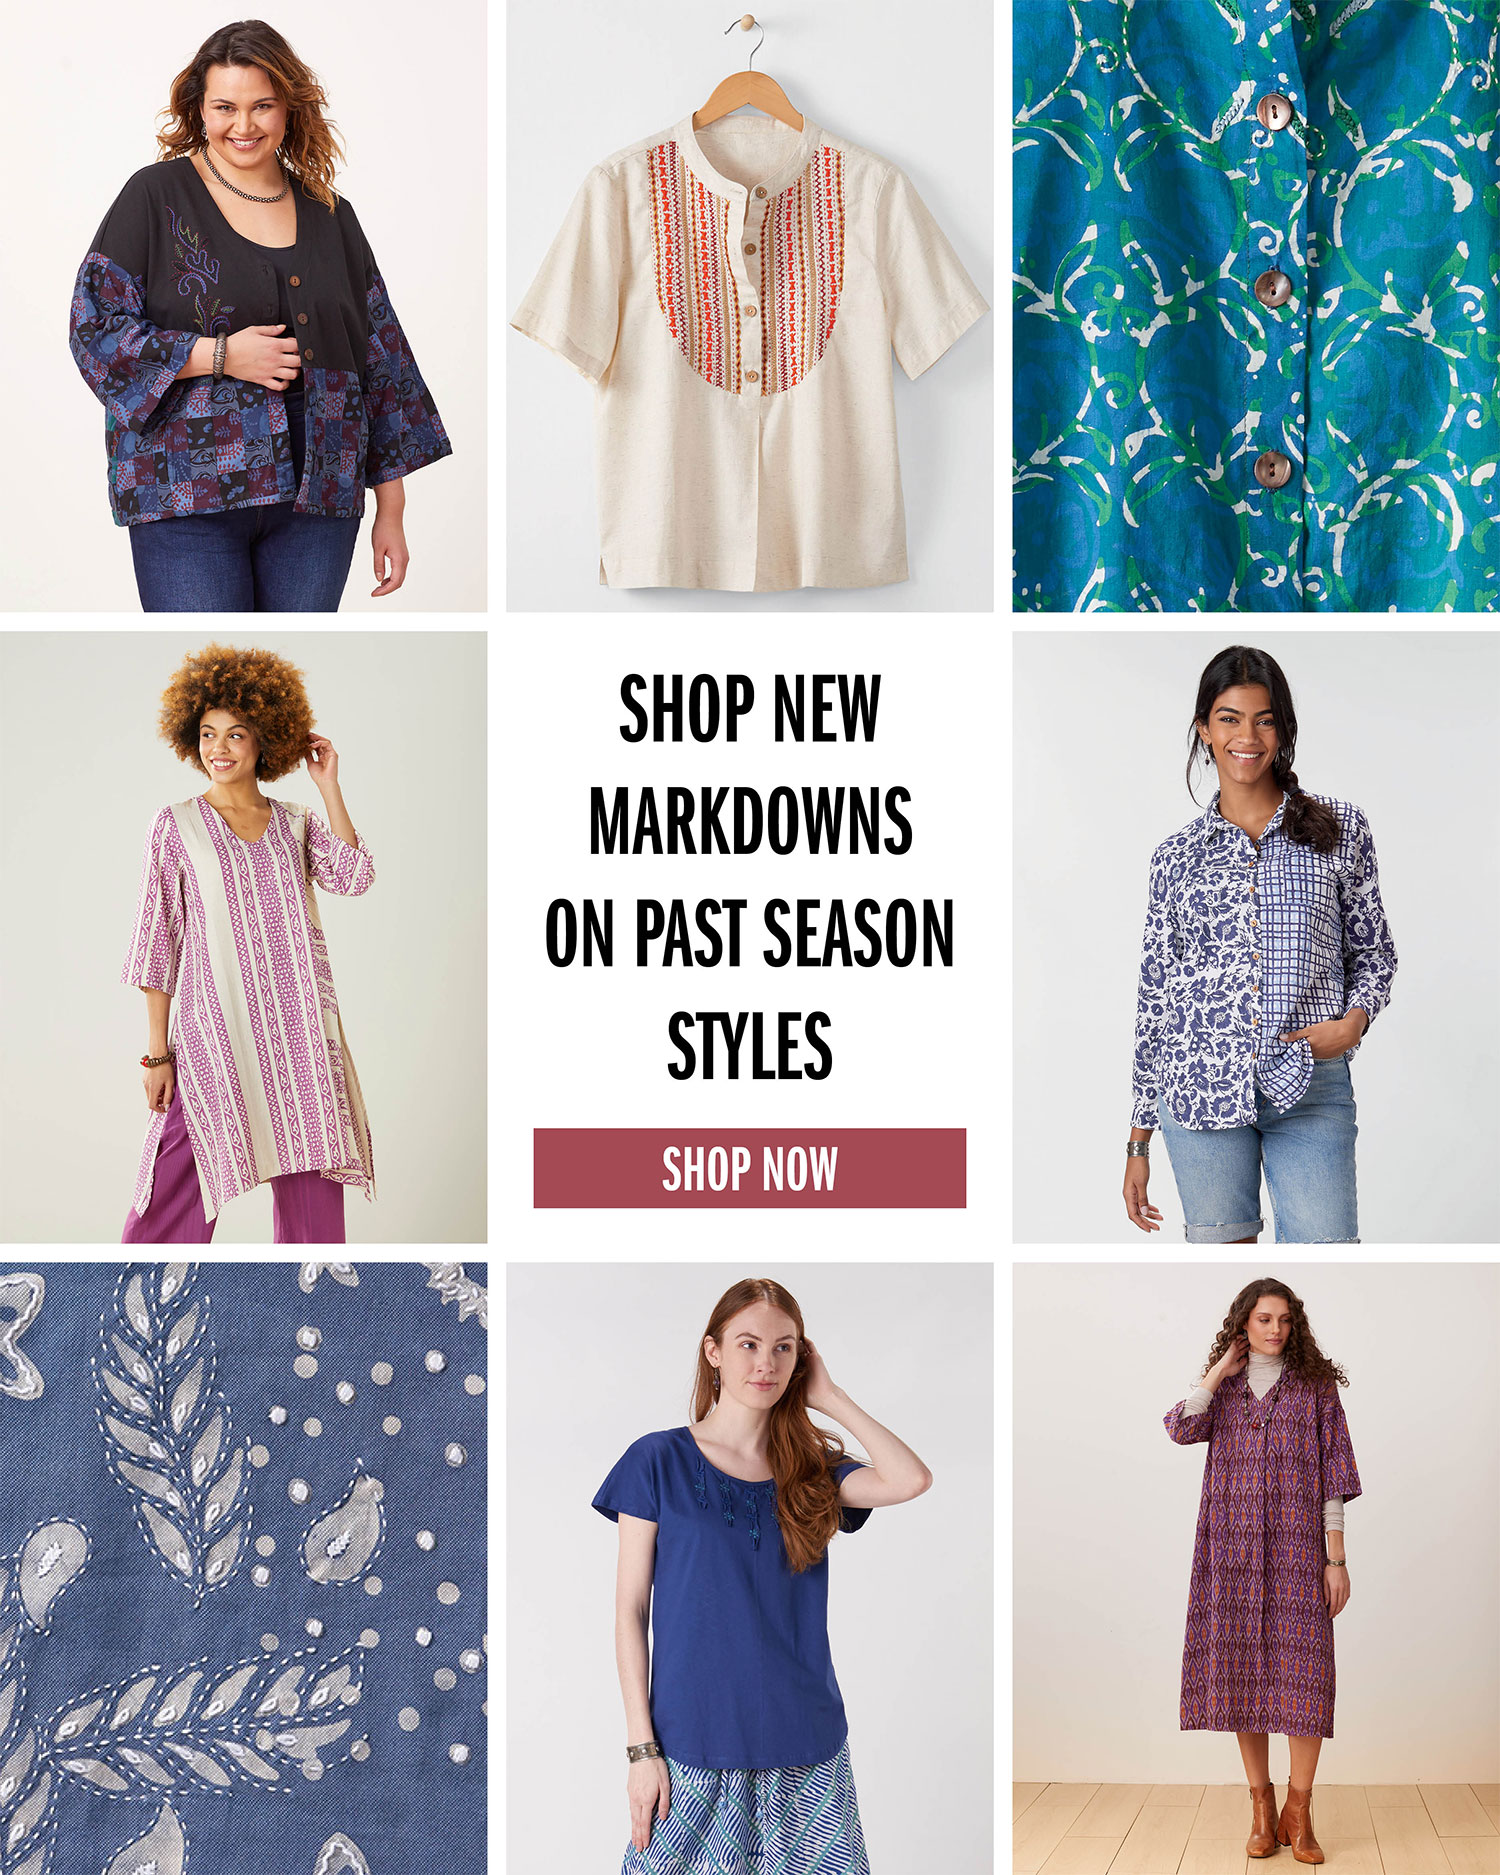 SHOP NEW MARKDOWNS ON PAST SEASON STYLES SHOP NOW